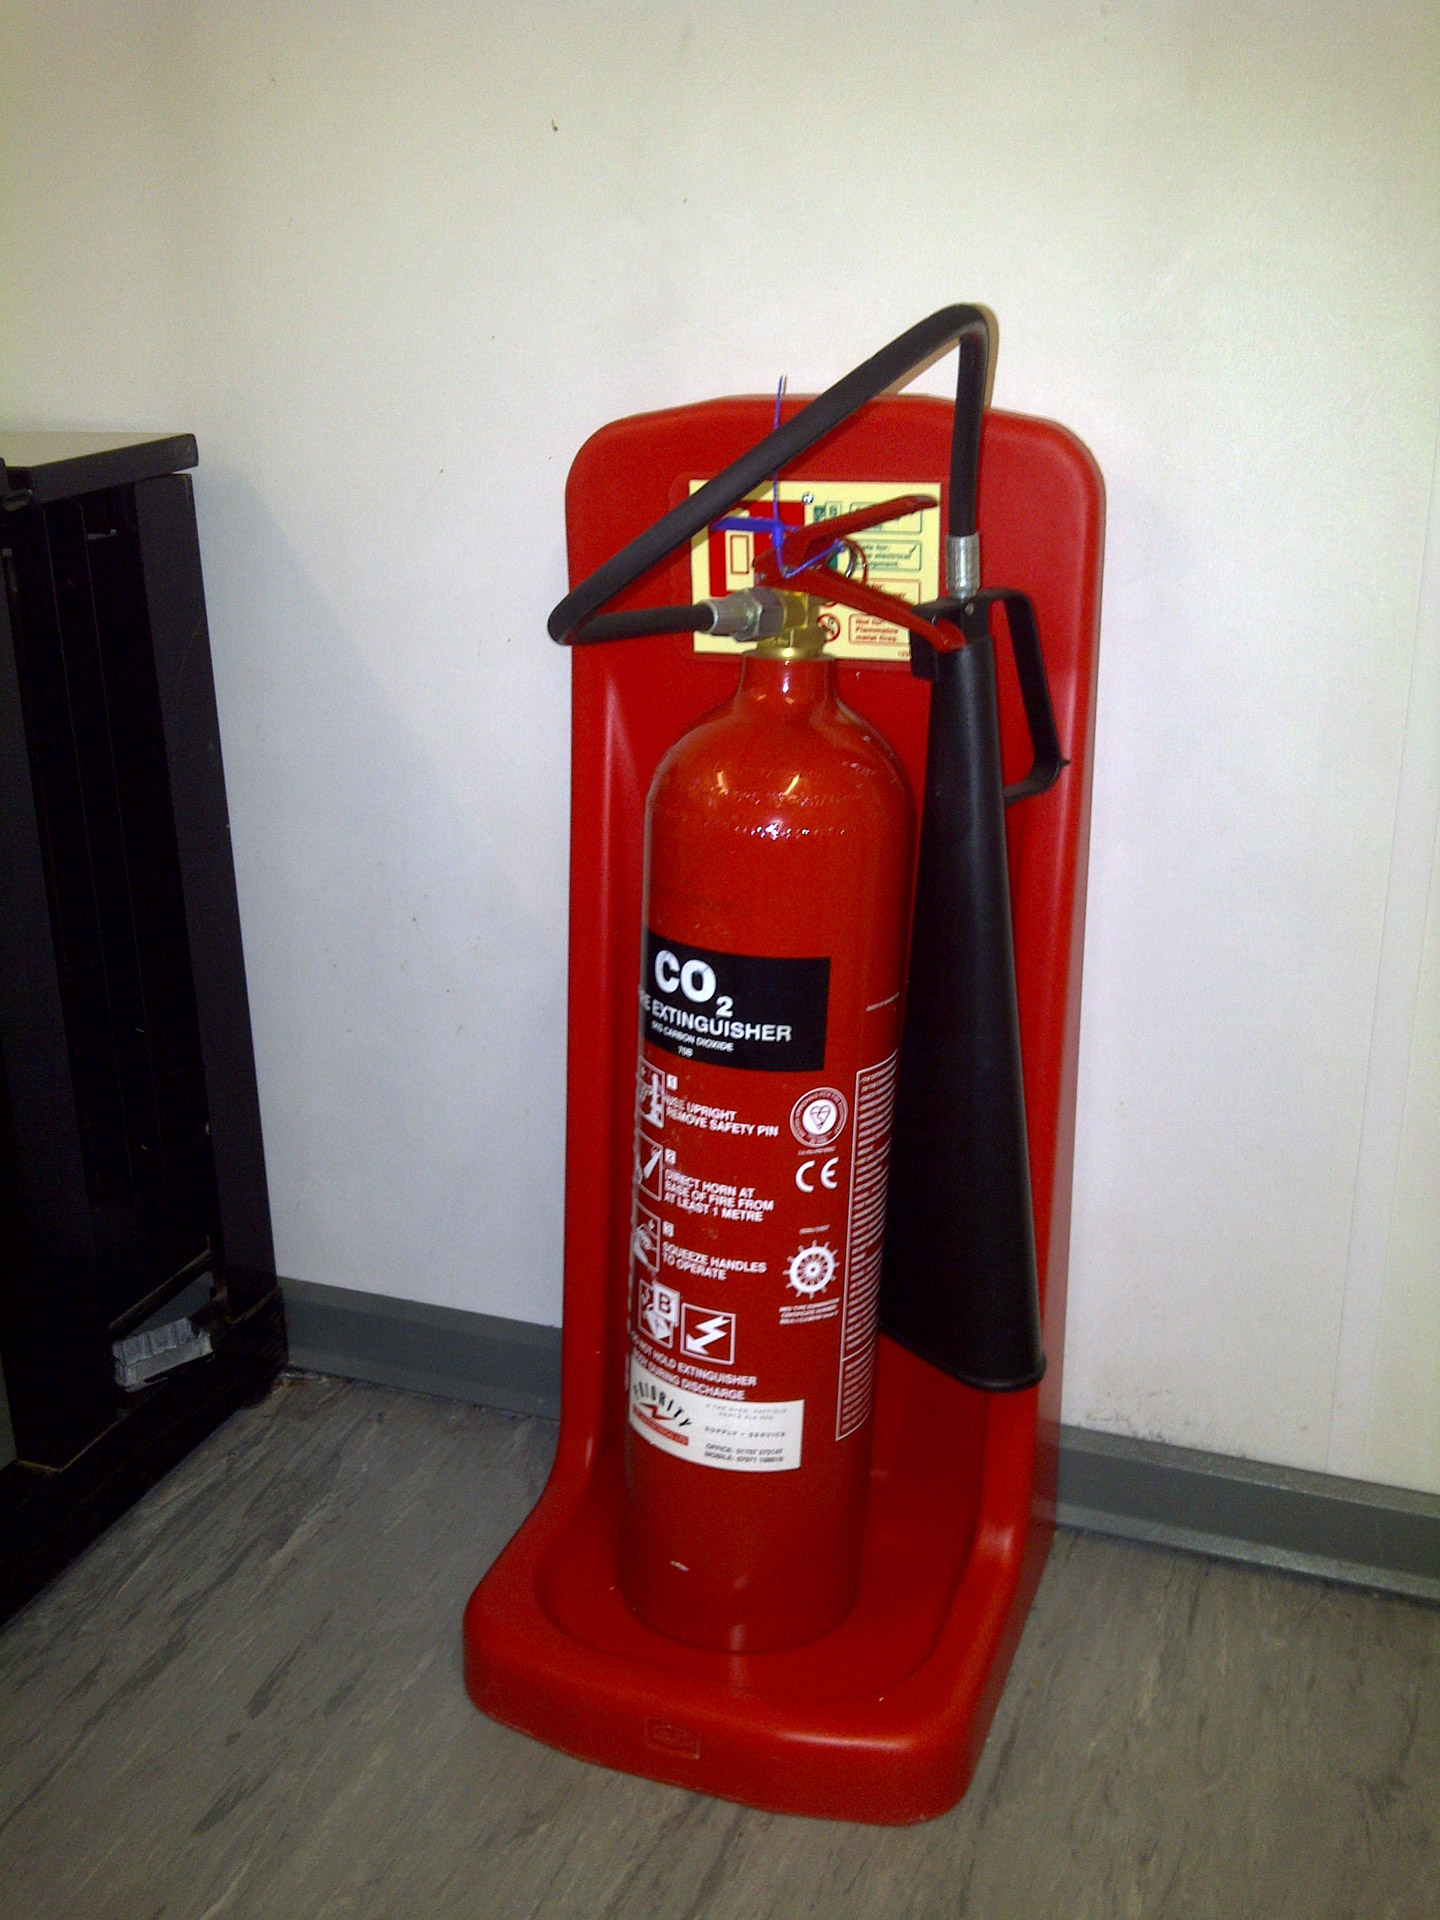 co2 fire extinguisher free photo